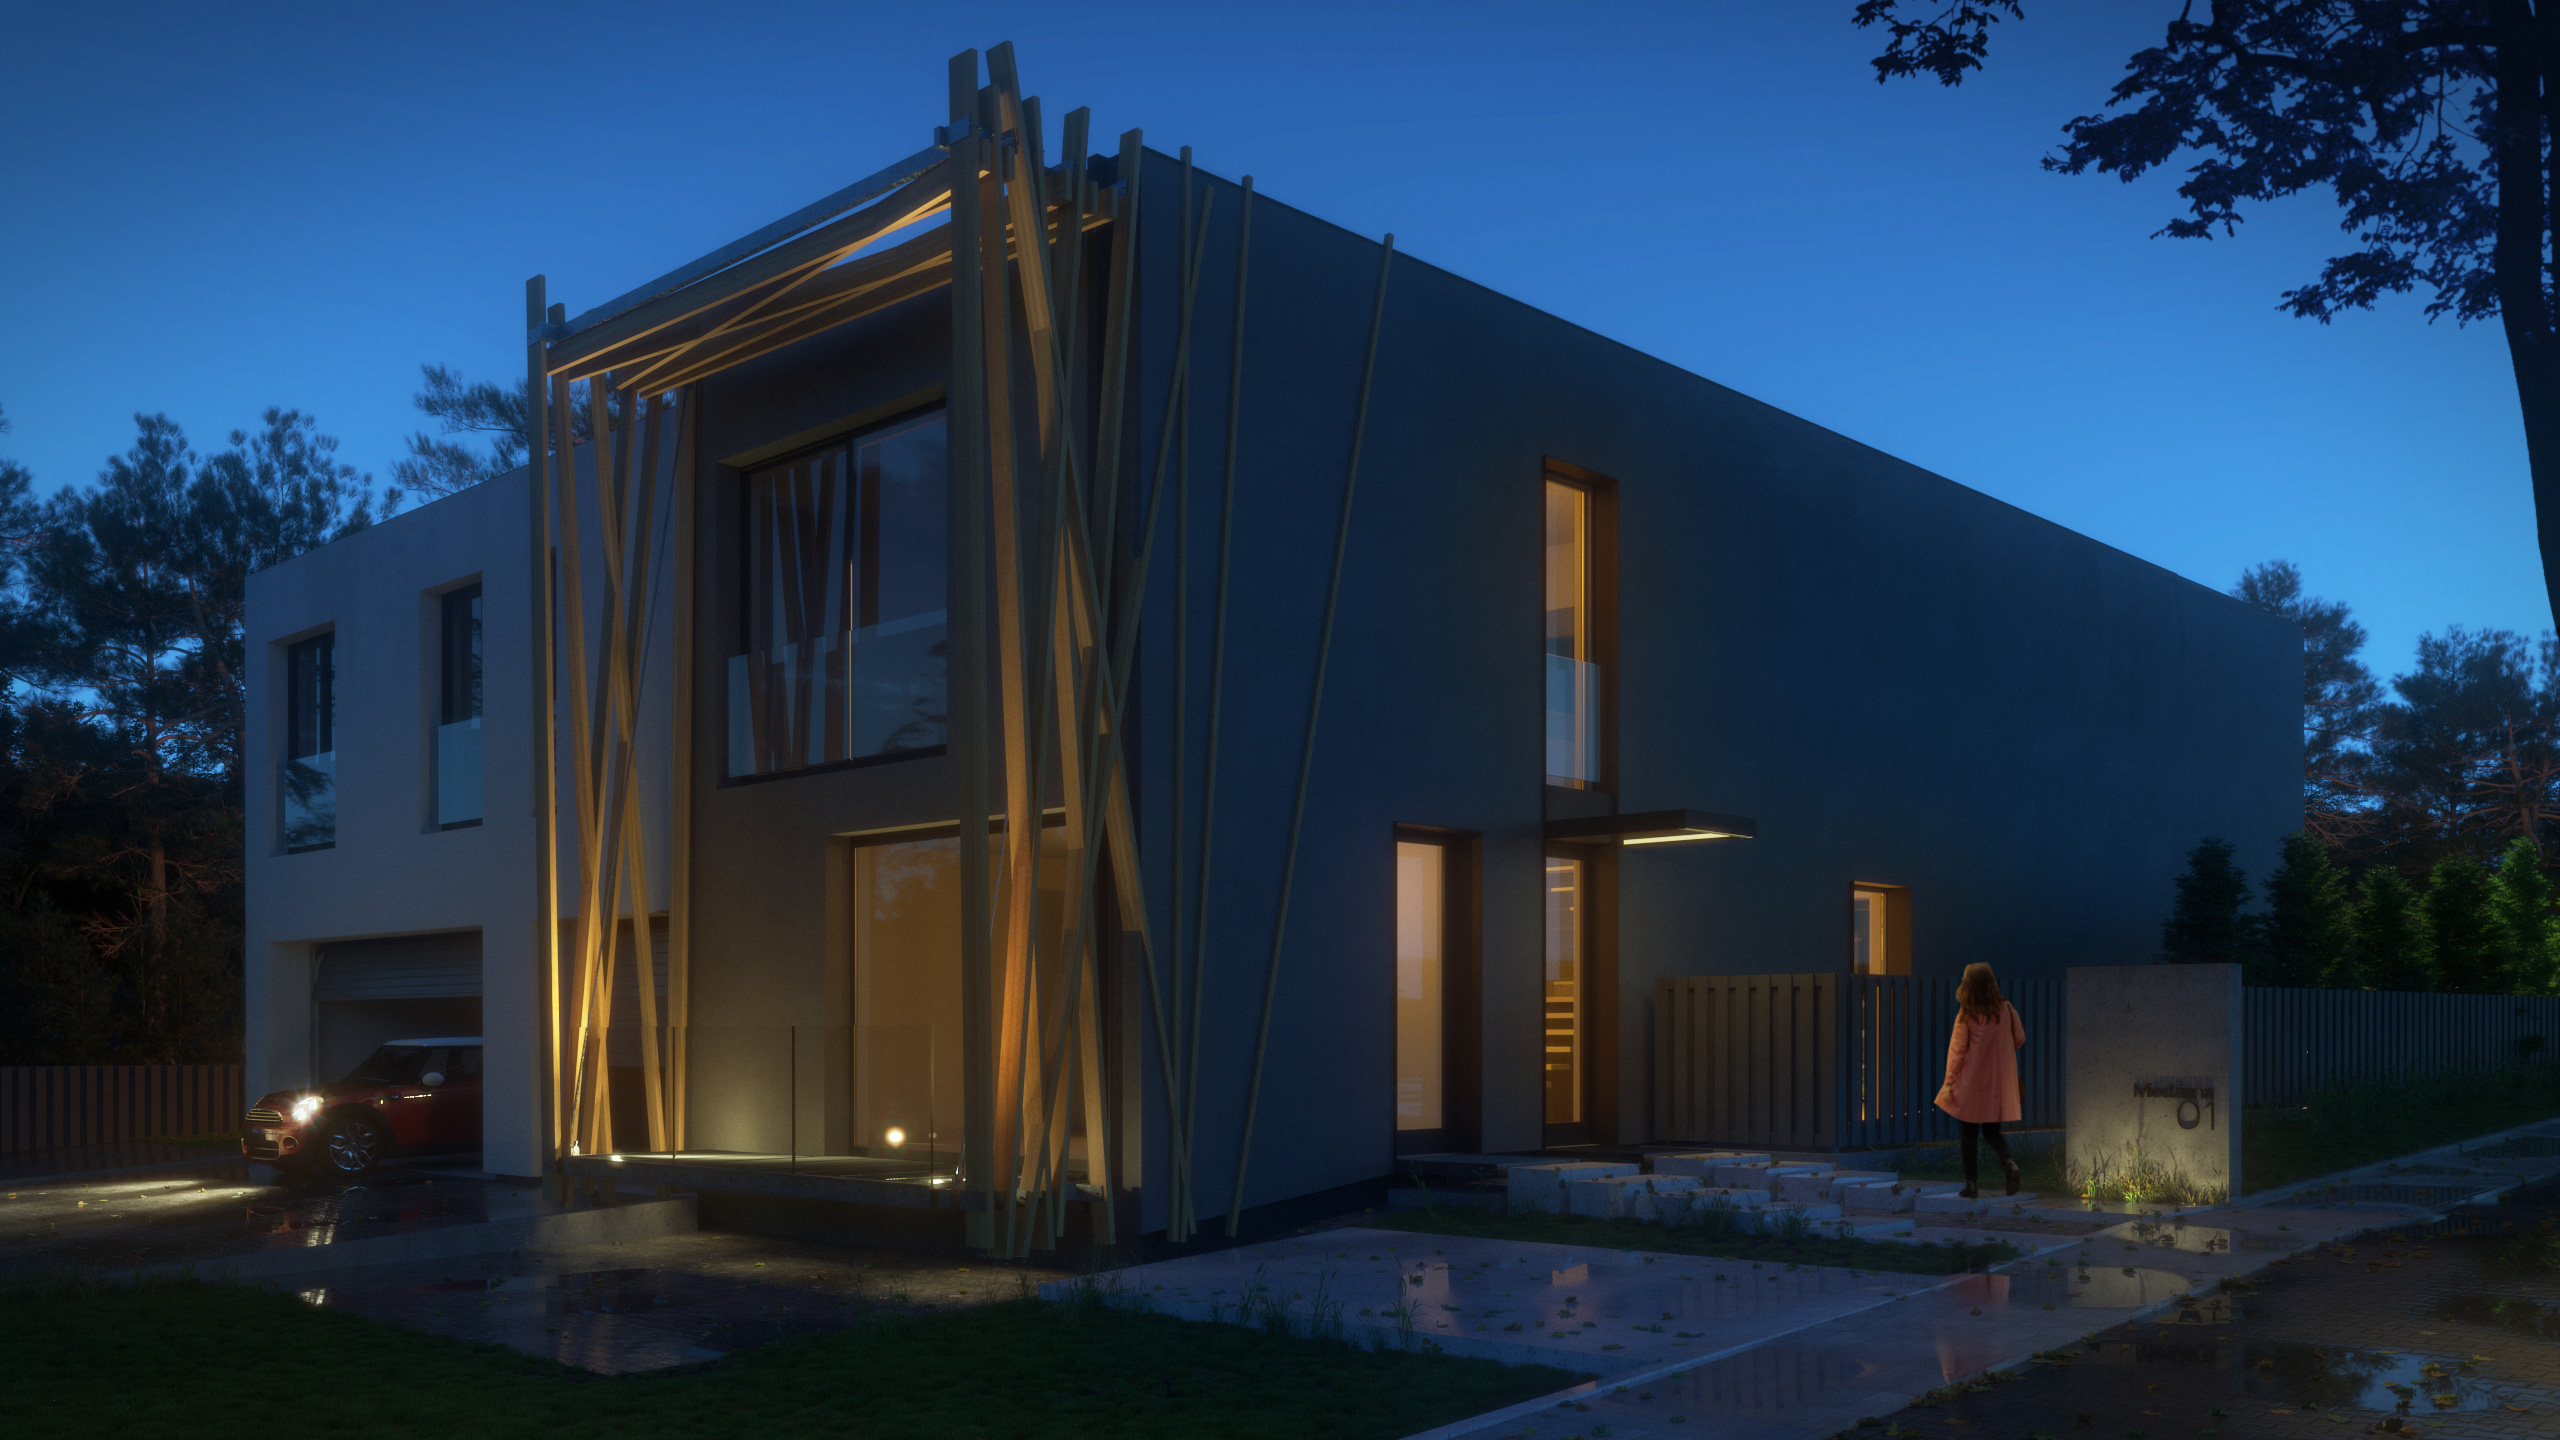 Visualization of a detached house by night - exterior